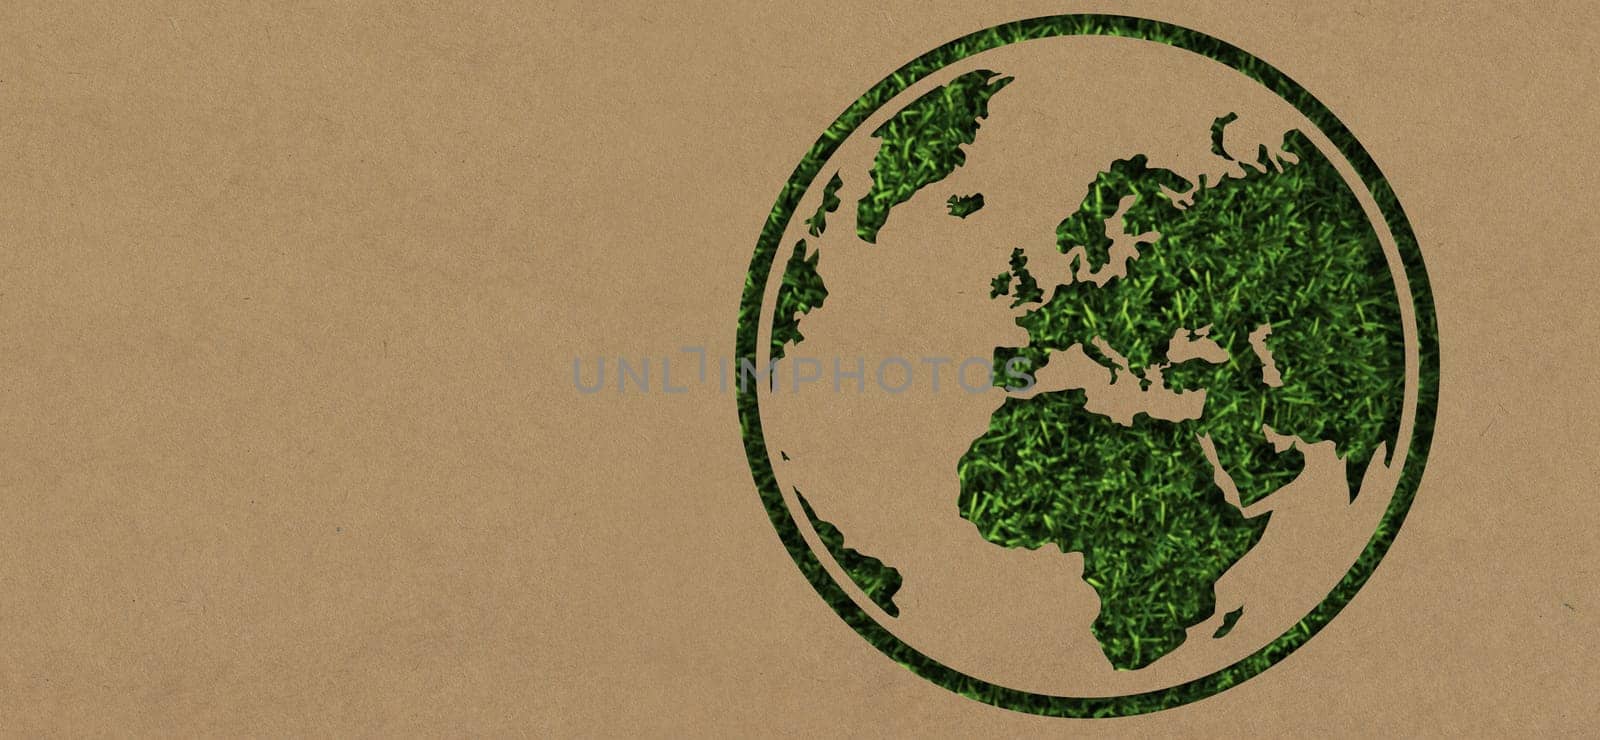 Earth, mockup and sustainability with an icon on a poster or sign for green environmental conservation. Nature, globe and earth day with a cardboard cutout as a symbol of global eco friendly growth.